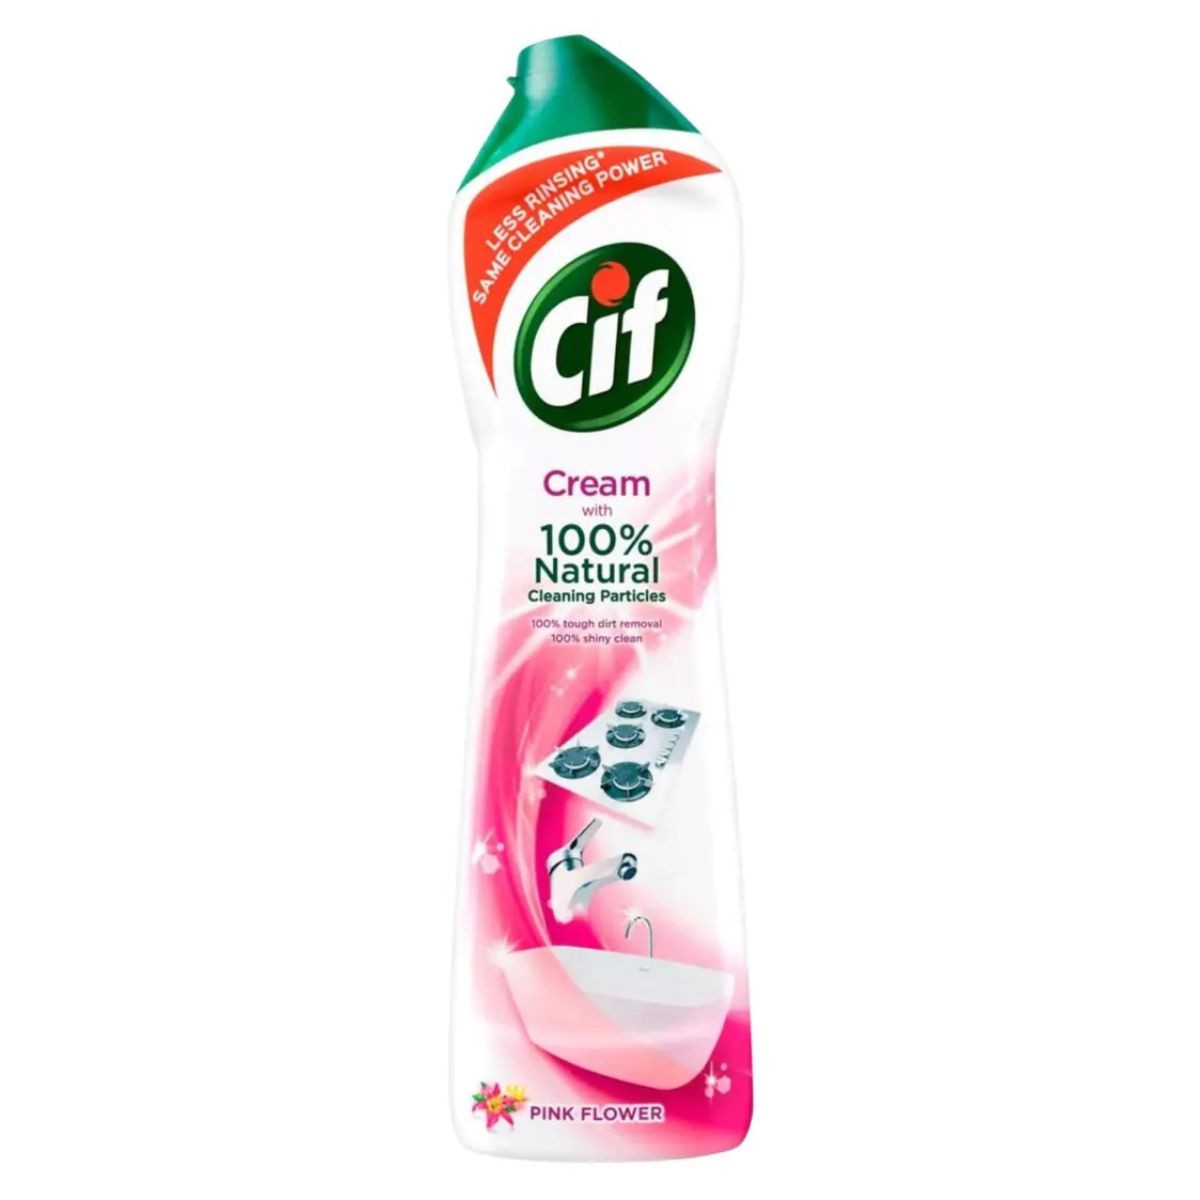 A bottle of Cif - Cream Pink Flower - 500ml on a white background.